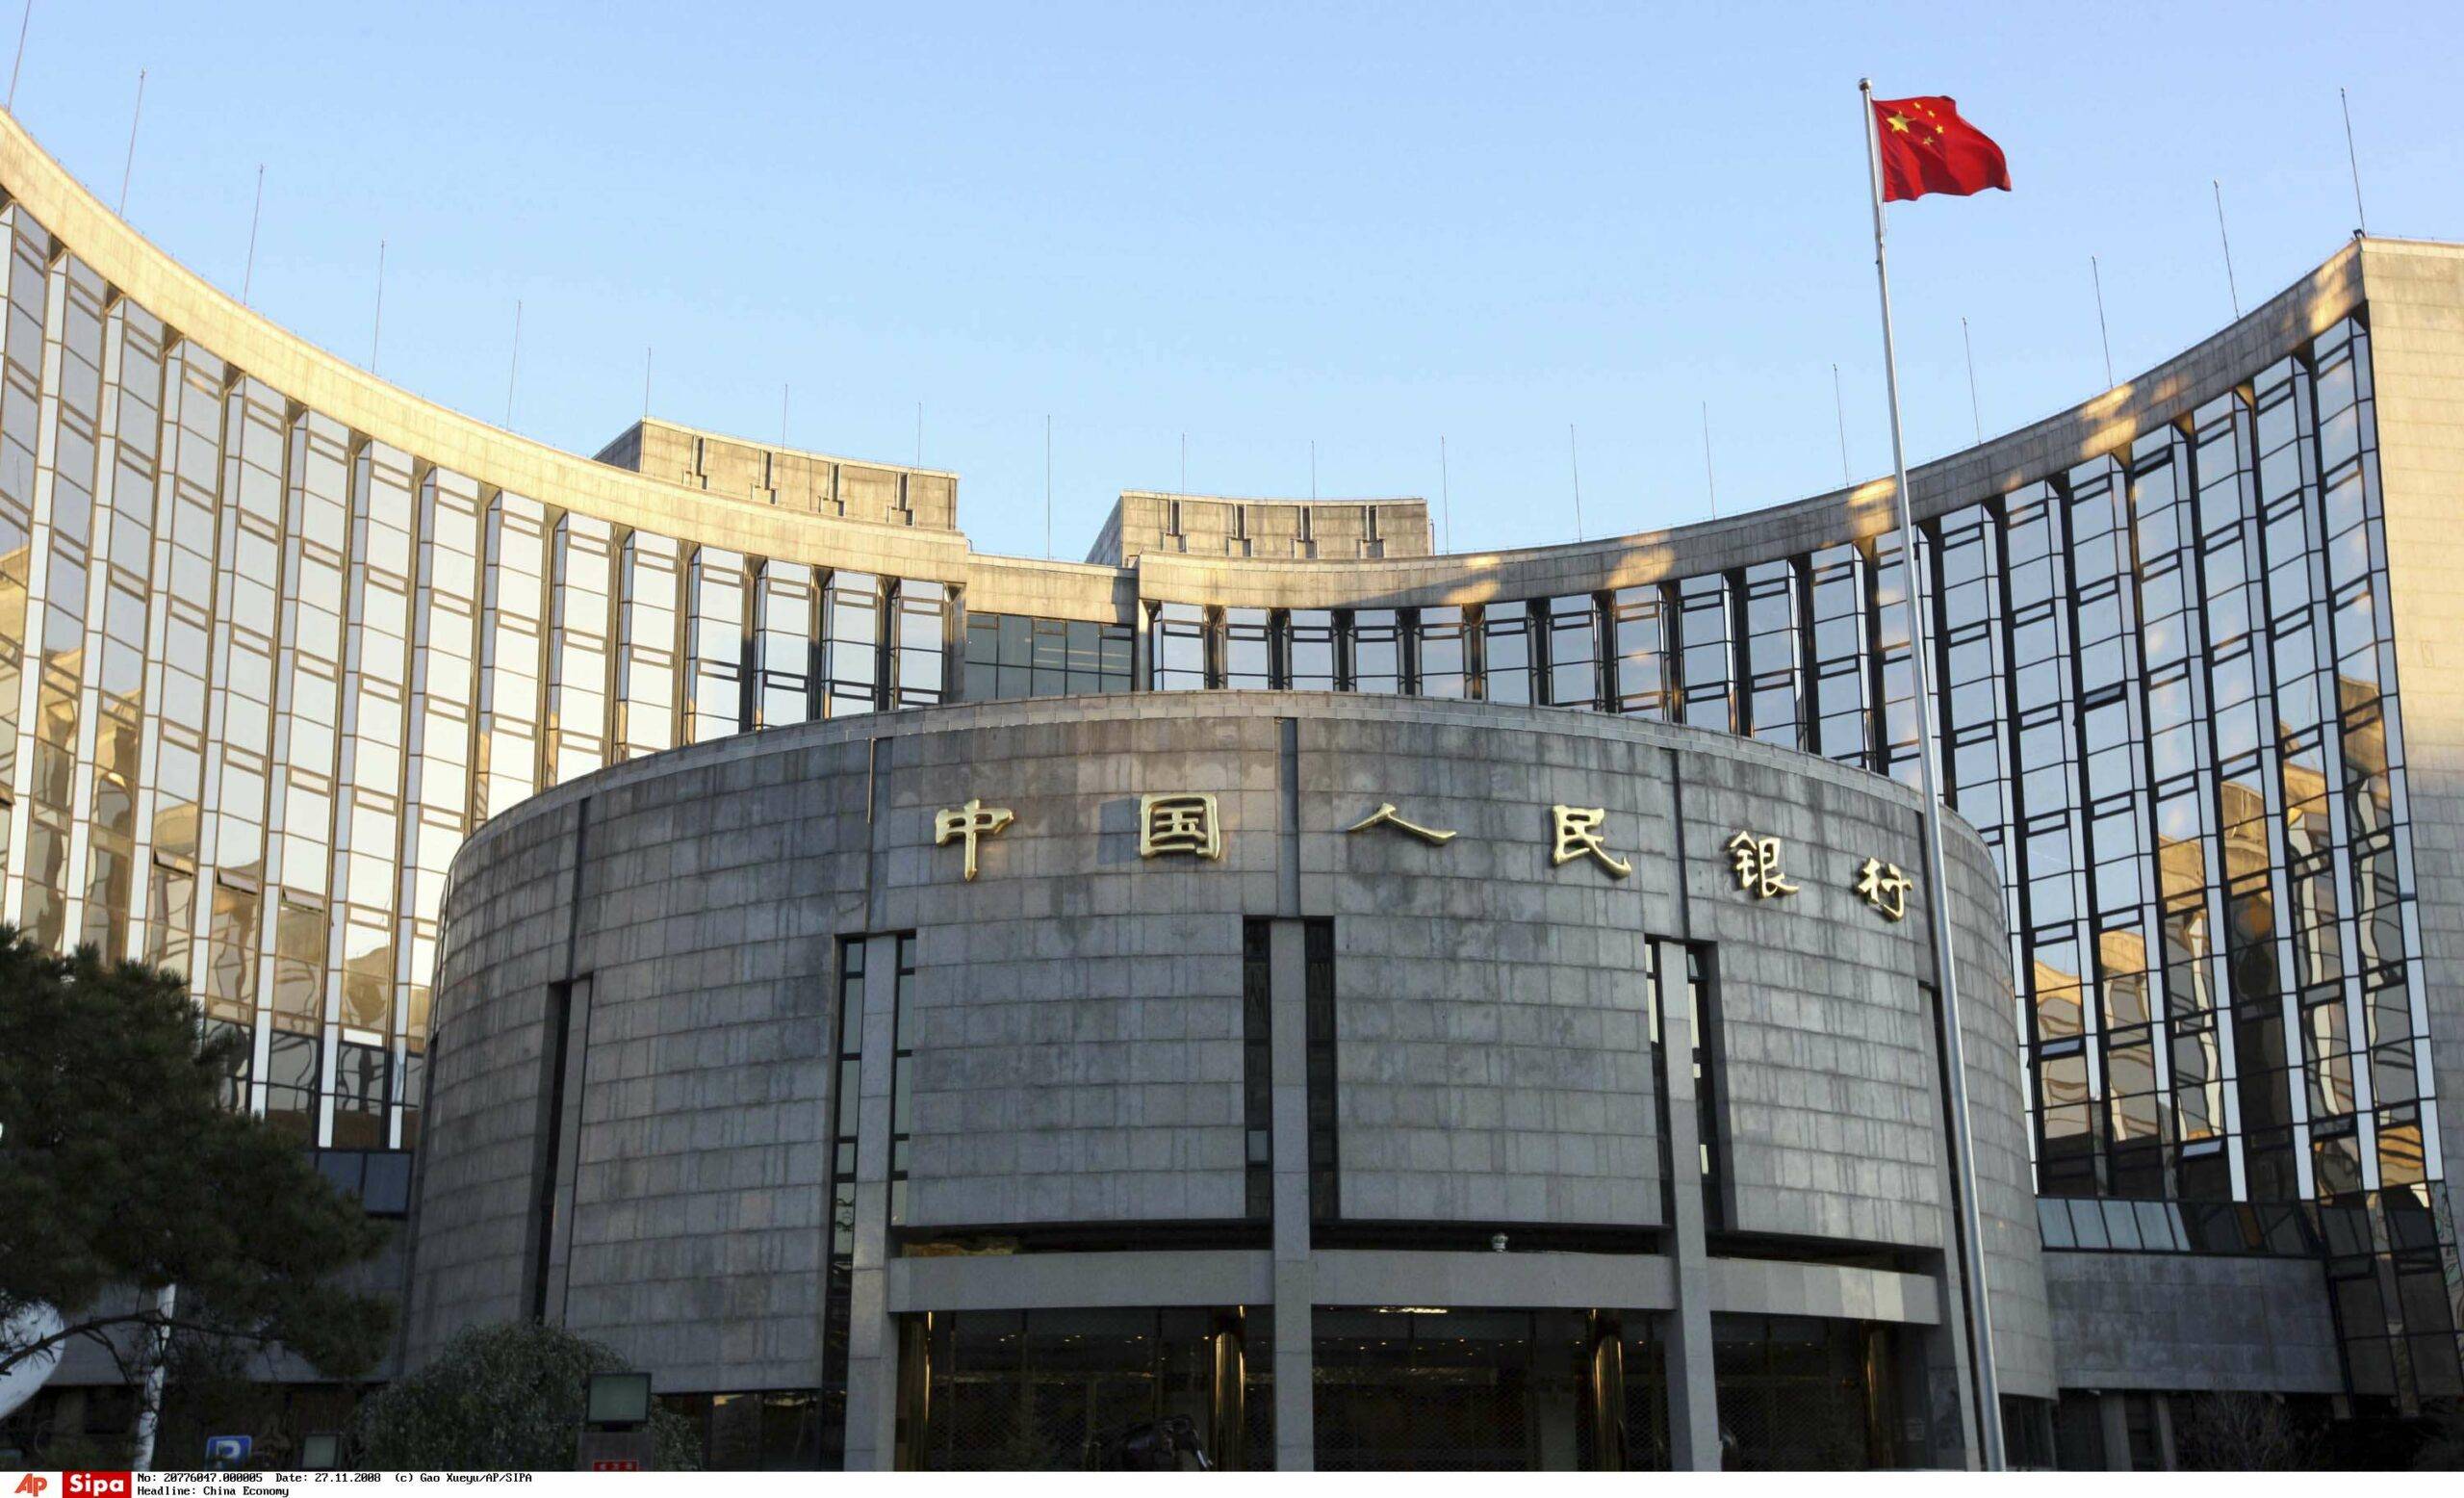 In this photo released by China's Xinhua News Agency, a Chinese flag flutters in front of the headquarters of the People's Bank of China (PBOC) in Beijing on Thursday, Nov. 27, 2008 . The impact of the global financial crisis on China's economy is deepening and a large interest rate cut announced Wednesday by the central bank is essential to boosting slowing growth, the country's top planner said. (AP Photo/Xinhua, Gao Xueyu)/China_Economy_XIN101/0811270921